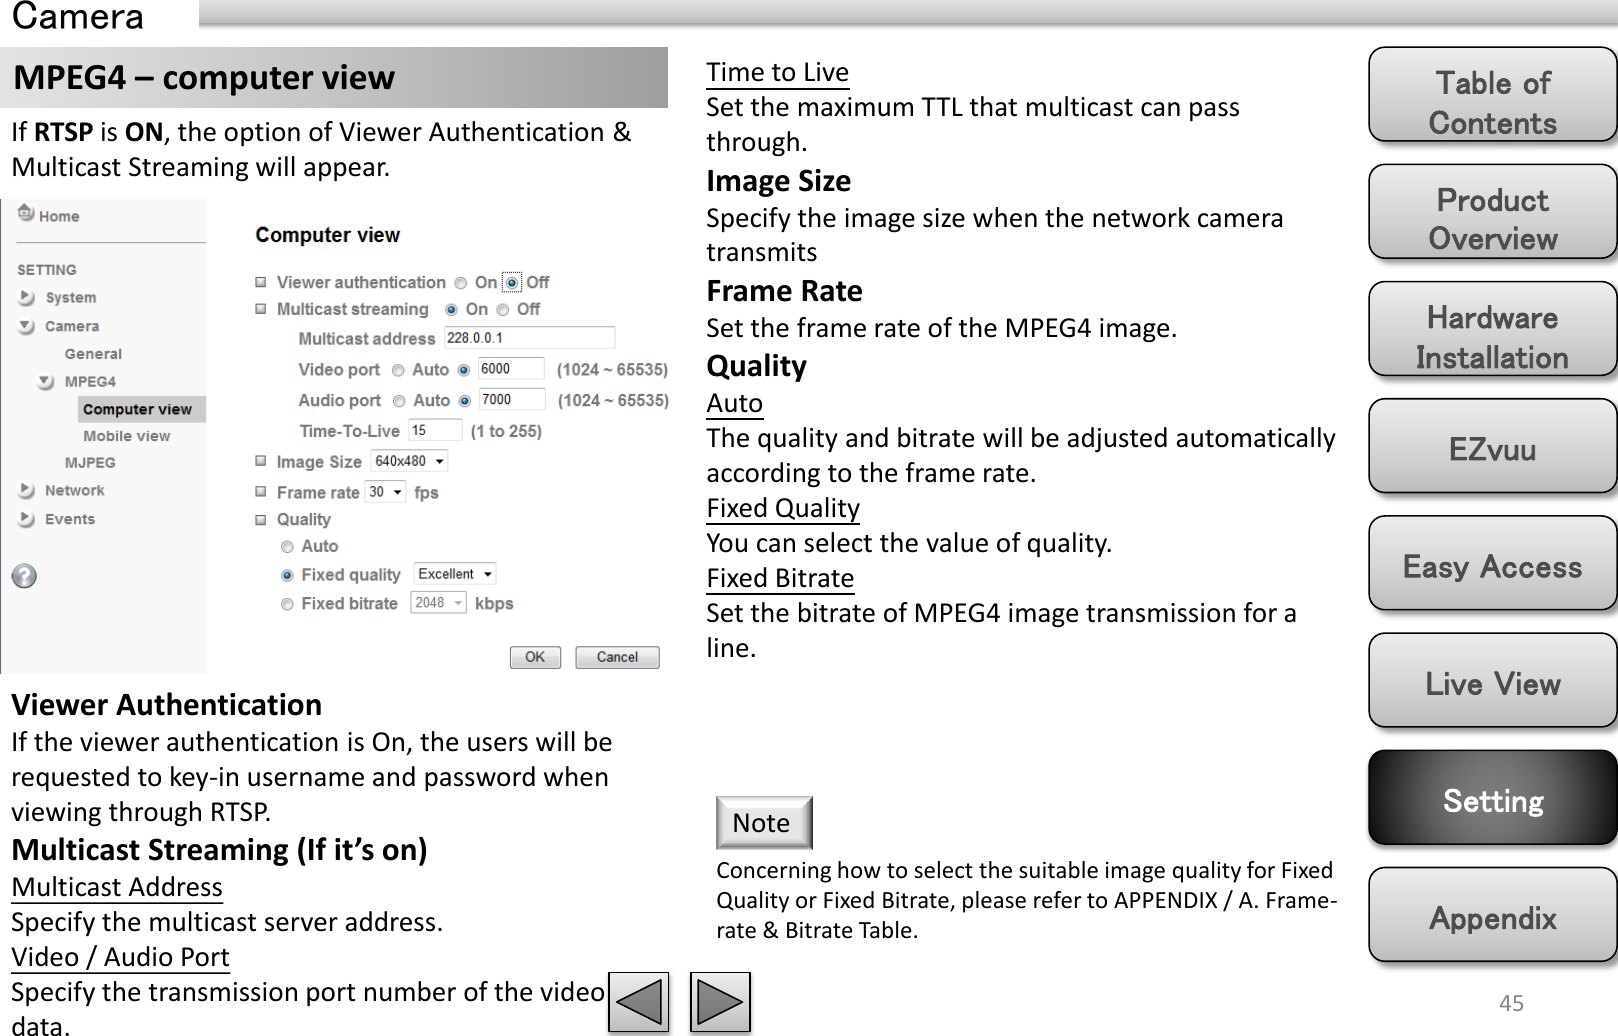 Product Overview Hardware Installation Easy Access EZvuu Setting Live View Appendix Table of Contents 45 MPEG4 – computer view  Time to Live Set the maximum TTL that multicast can pass through.  Image Size Specify the image size when the network camera transmits Frame Rate Set the frame rate of the MPEG4 image. Quality Auto  The quality and bitrate will be adjusted automatically according to the frame rate. Fixed Quality You can select the value of quality. Fixed Bitrate Set the bitrate of MPEG4 image transmission for a line. Concerning how to select the suitable image quality for Fixed Quality or Fixed Bitrate, please refer to APPENDIX / A. Frame-rate &amp; Bitrate Table.  Note Viewer Authentication If the viewer authentication is On, the users will be requested to key-in username and password when viewing through RTSP. Multicast Streaming (If it’s on) Multicast Address Specify the multicast server address.  Video / Audio Port Specify the transmission port number of the video data. If RTSP is ON, the option of Viewer Authentication &amp; Multicast Streaming will appear.   Camera 